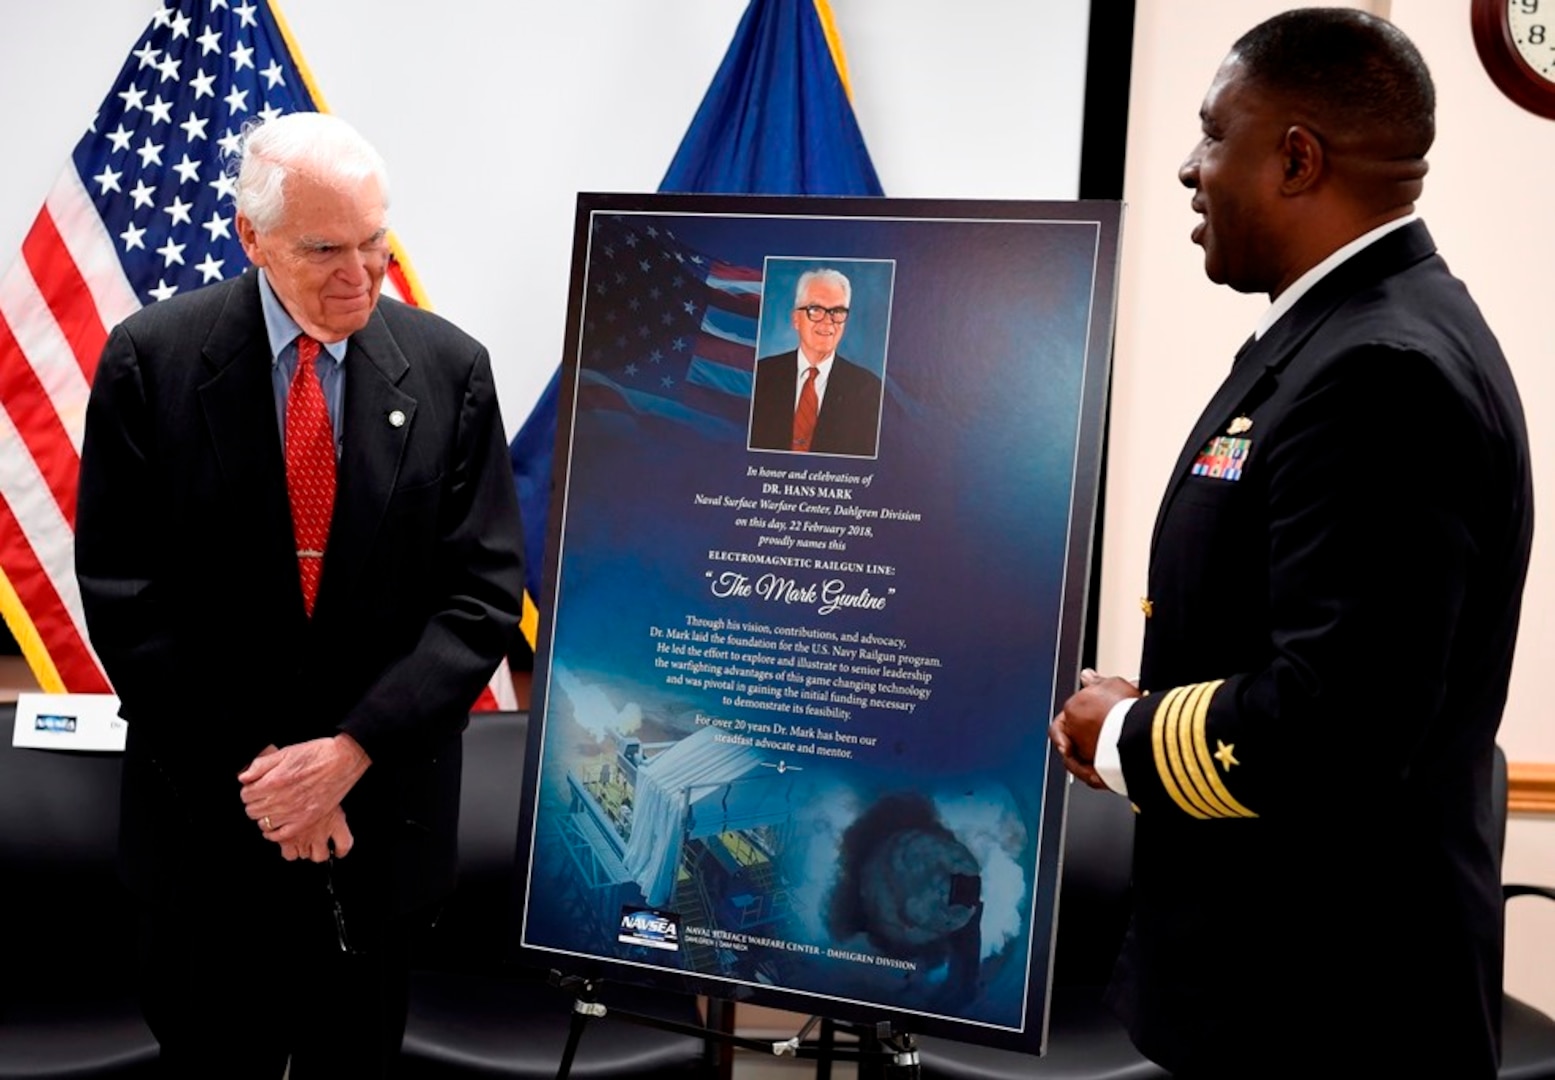 IMAGE: DAHLGREN, Va. (Feb. 22, 2018) – Capt. Godfrey 'Gus' Weekes, right, Naval Surface Warfare Center Dahlgren Division commanding officer, looks over a commemorative poster with Dr. Hans Mark, who along with retired Adm. James Hogg, were honored during an electromagnetic railgun line naming ceremony. As public servants, Hogg and Mark laid the foundation for the U.S. Navy Railgun Program and led the effort to explore and illustrate to senior leadership the warfighting advantages of this game-changing technology and were pivotal in gaining the initial funding necessary to demonstrate its feasibility. (U.S. Navy photo by John F. Williams/Released)